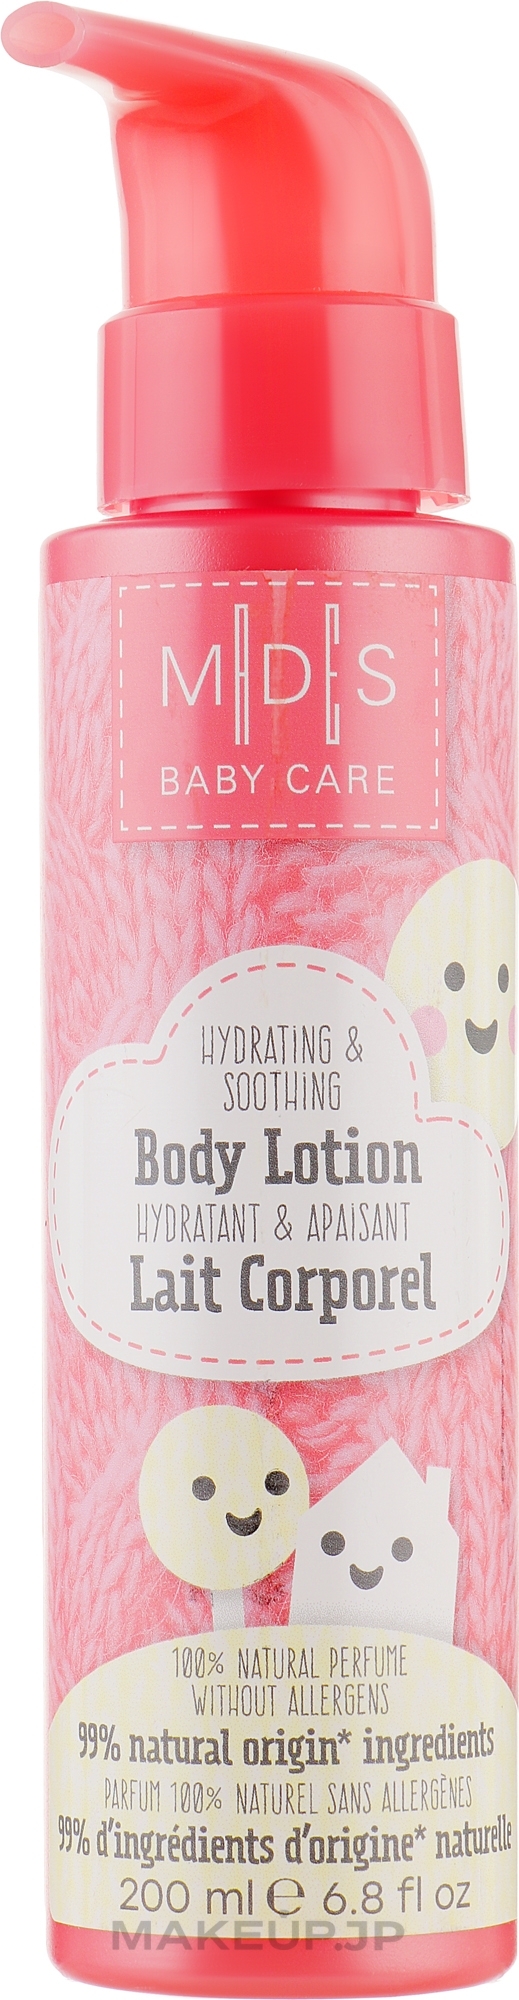 Organic Baby Hypoallergenic Lotion - Mades Cosmetics M|D|S Baby Care Body Lotion — photo 200 ml